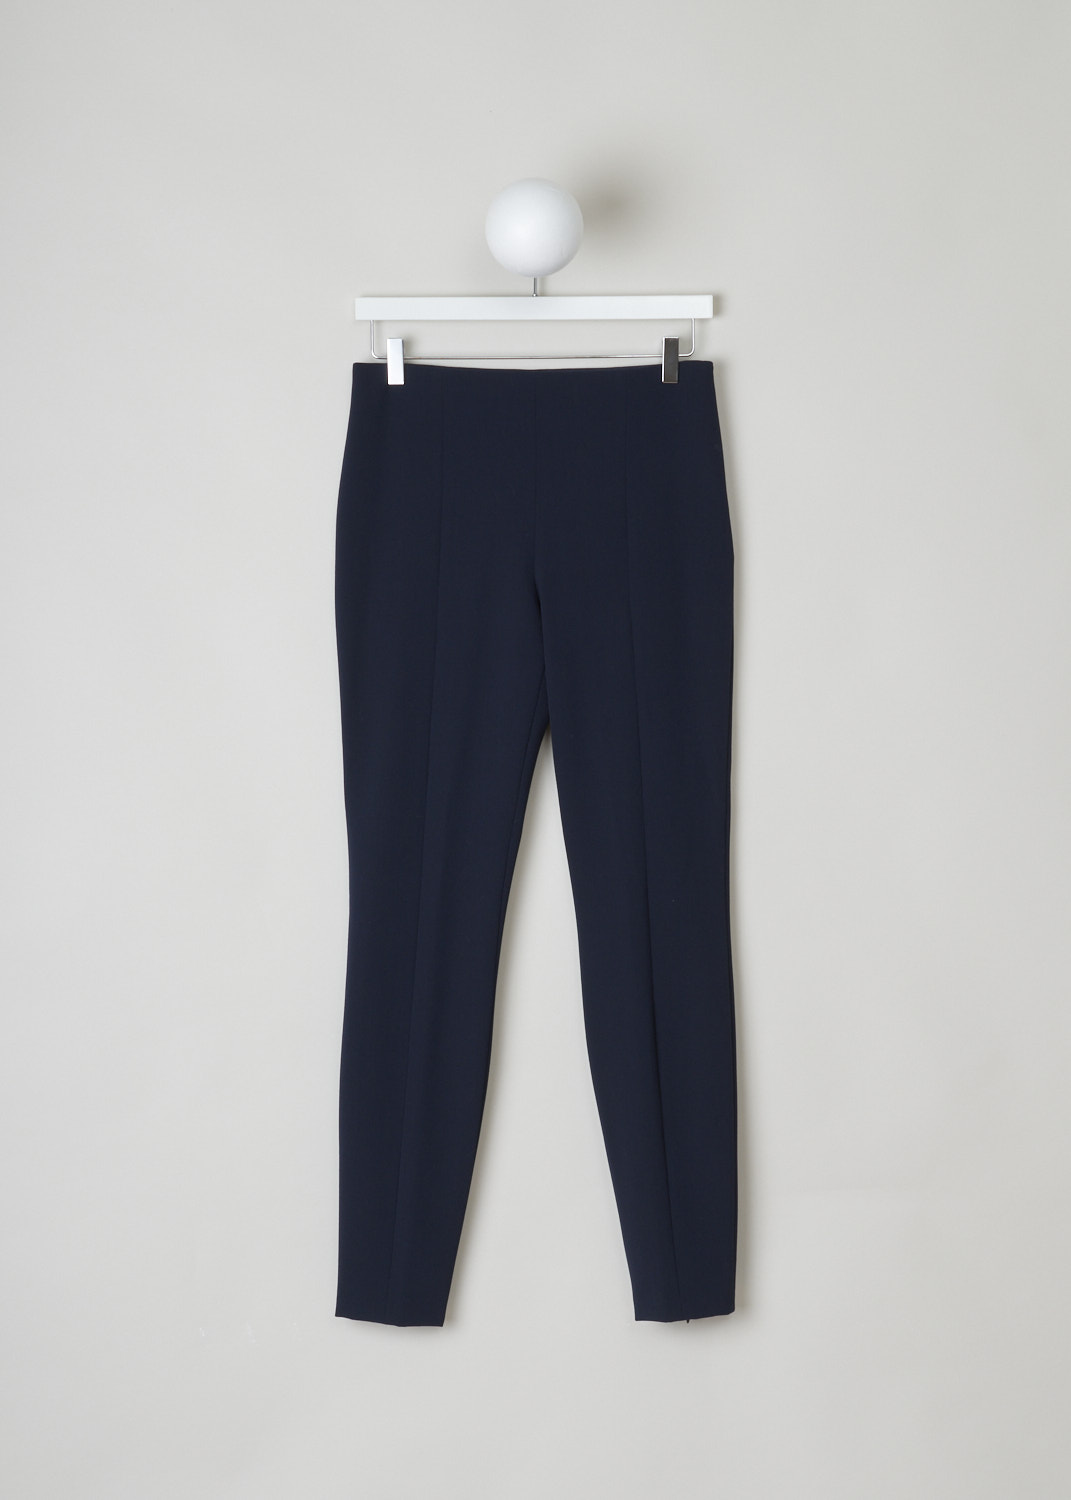 The row, Midnight blue straight pants, losso_pant_4232WI_223_midnight_blue, blue, front, This midnight blue straight pants, know for its modesty, comes without waistband, belt loops or pockets. Featuring a slim fit, zipper on the side seam for closure and instead of a pleat decorating the pants this model has a seam running down the pants. 